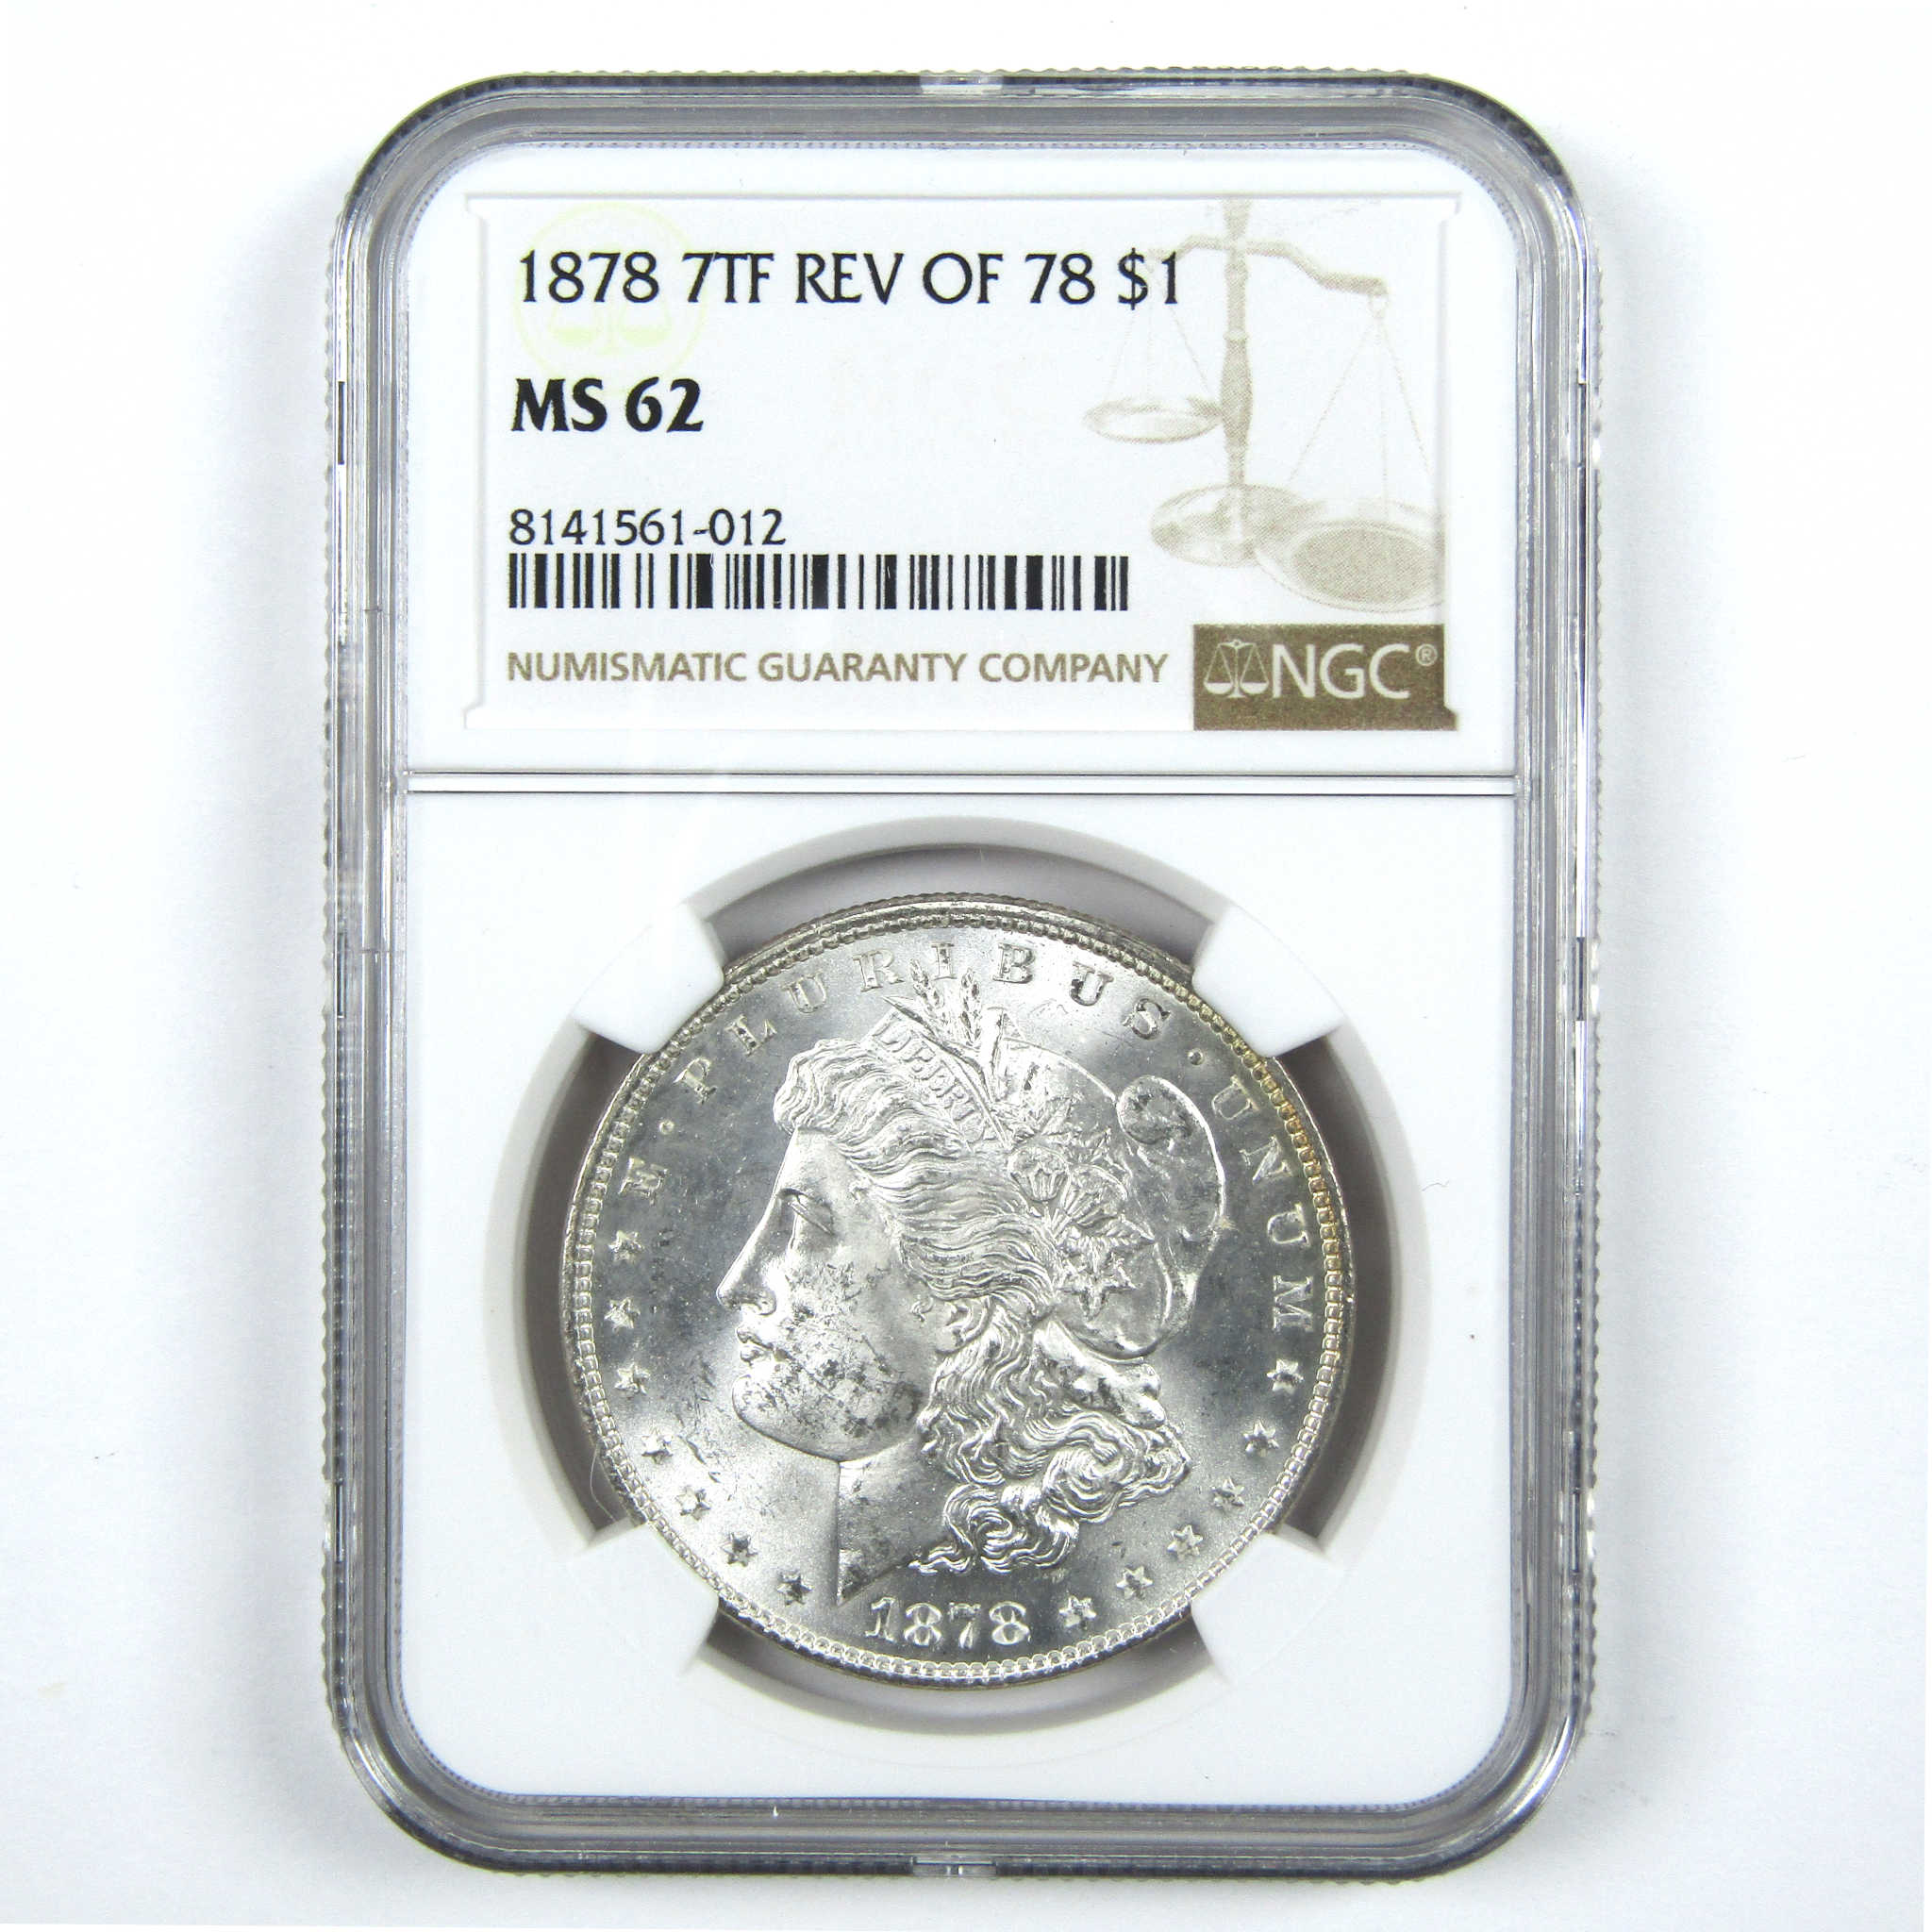 1878 7TF Rev 78 Morgan Dollar MS 62 NGC Uncirculated SKU:I14022 - Morgan coin - Morgan silver dollar - Morgan silver dollar for sale - Profile Coins &amp; Collectibles